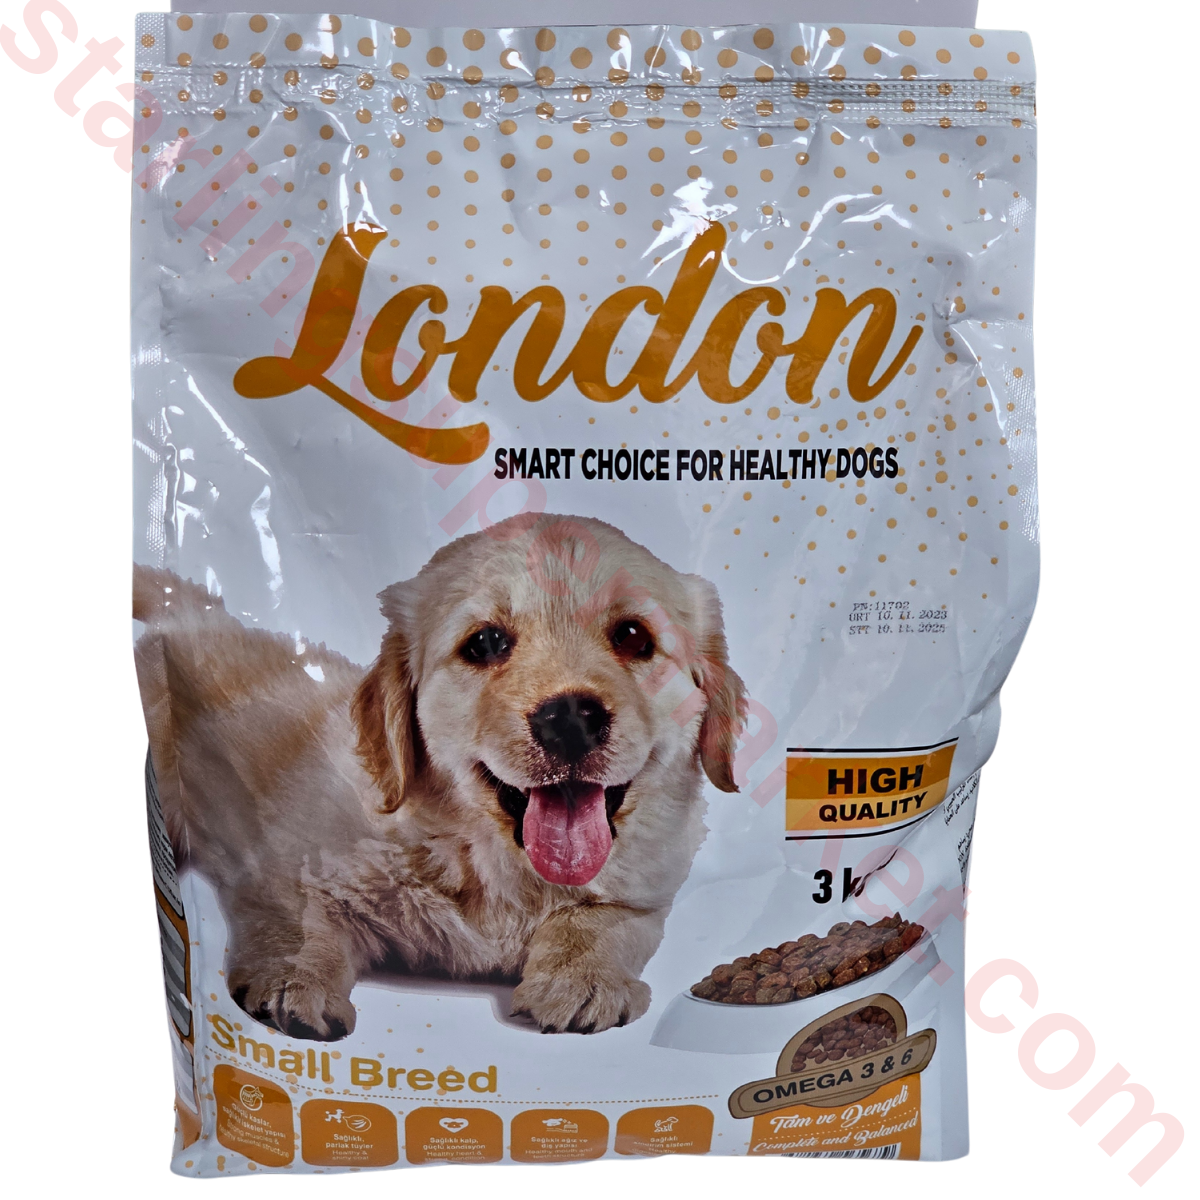 LONDON DOG FOOD DRY SMALL BREED 3 KG